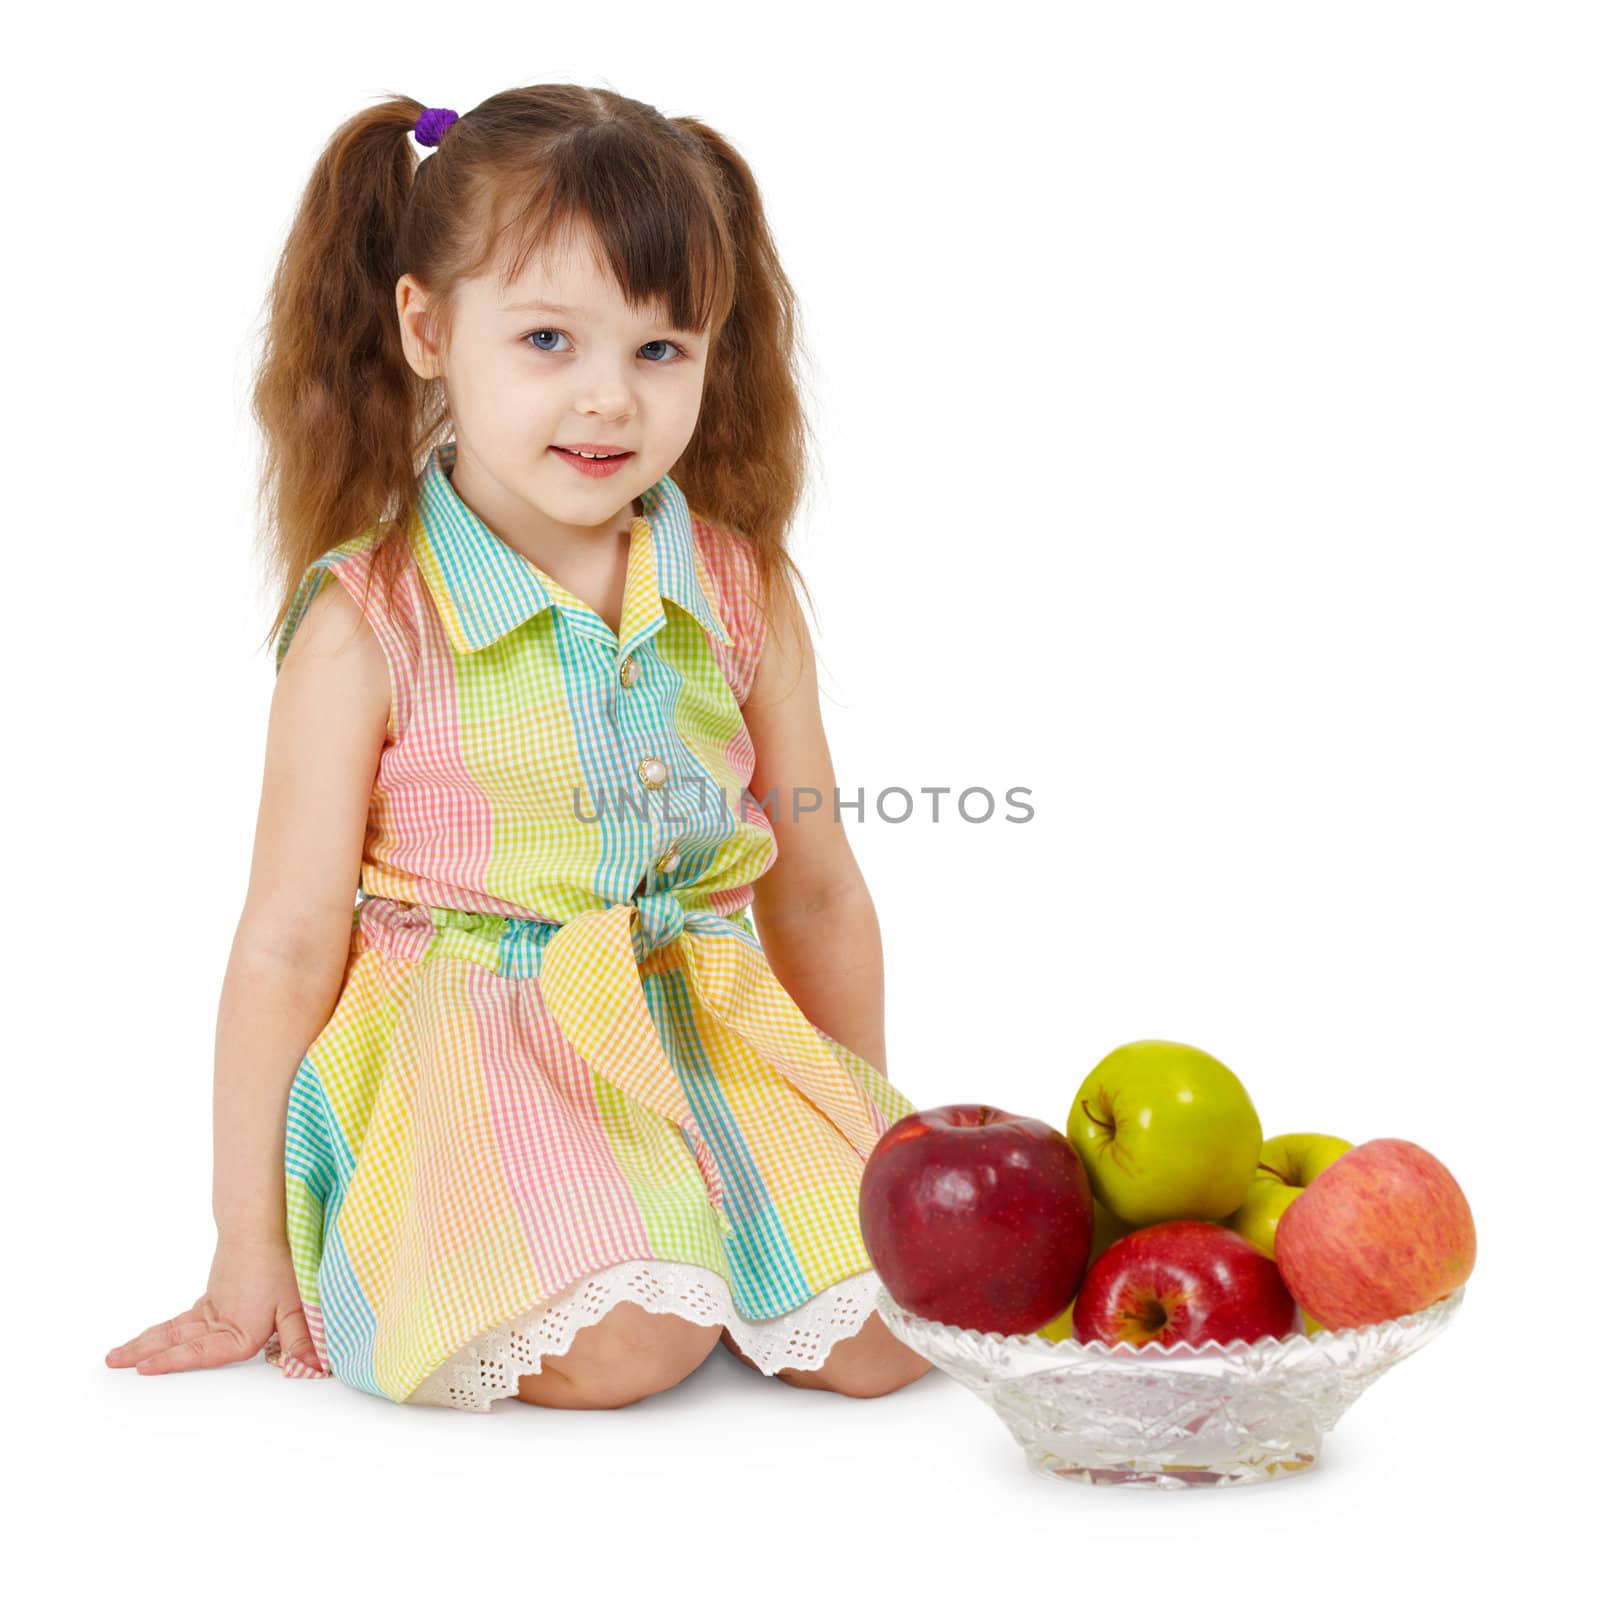 A little girl with a dish filled with apples